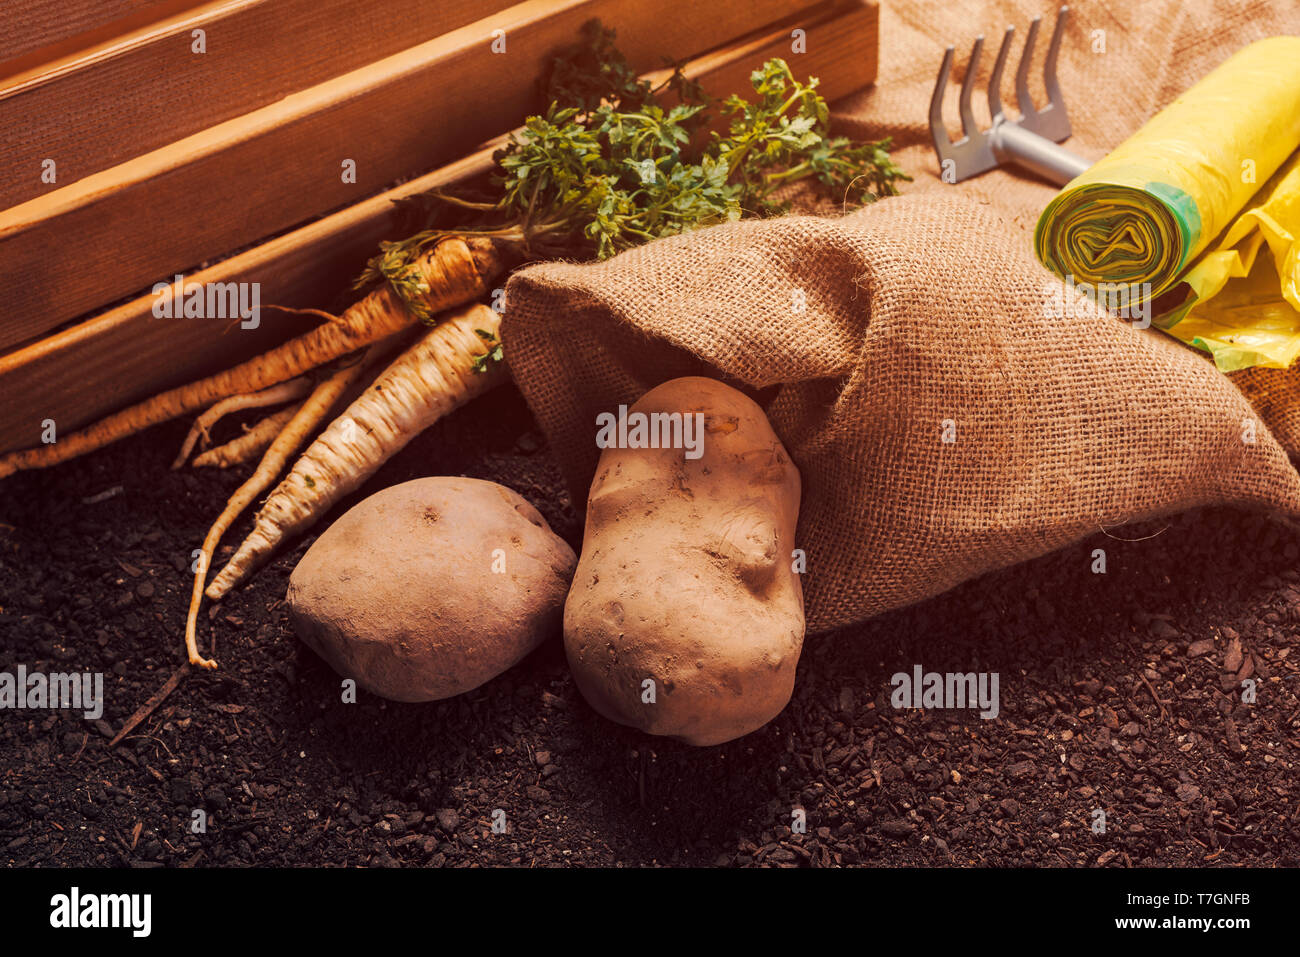 Organic farming of parsley and potato, homegrown vegetable food production Stock Photo